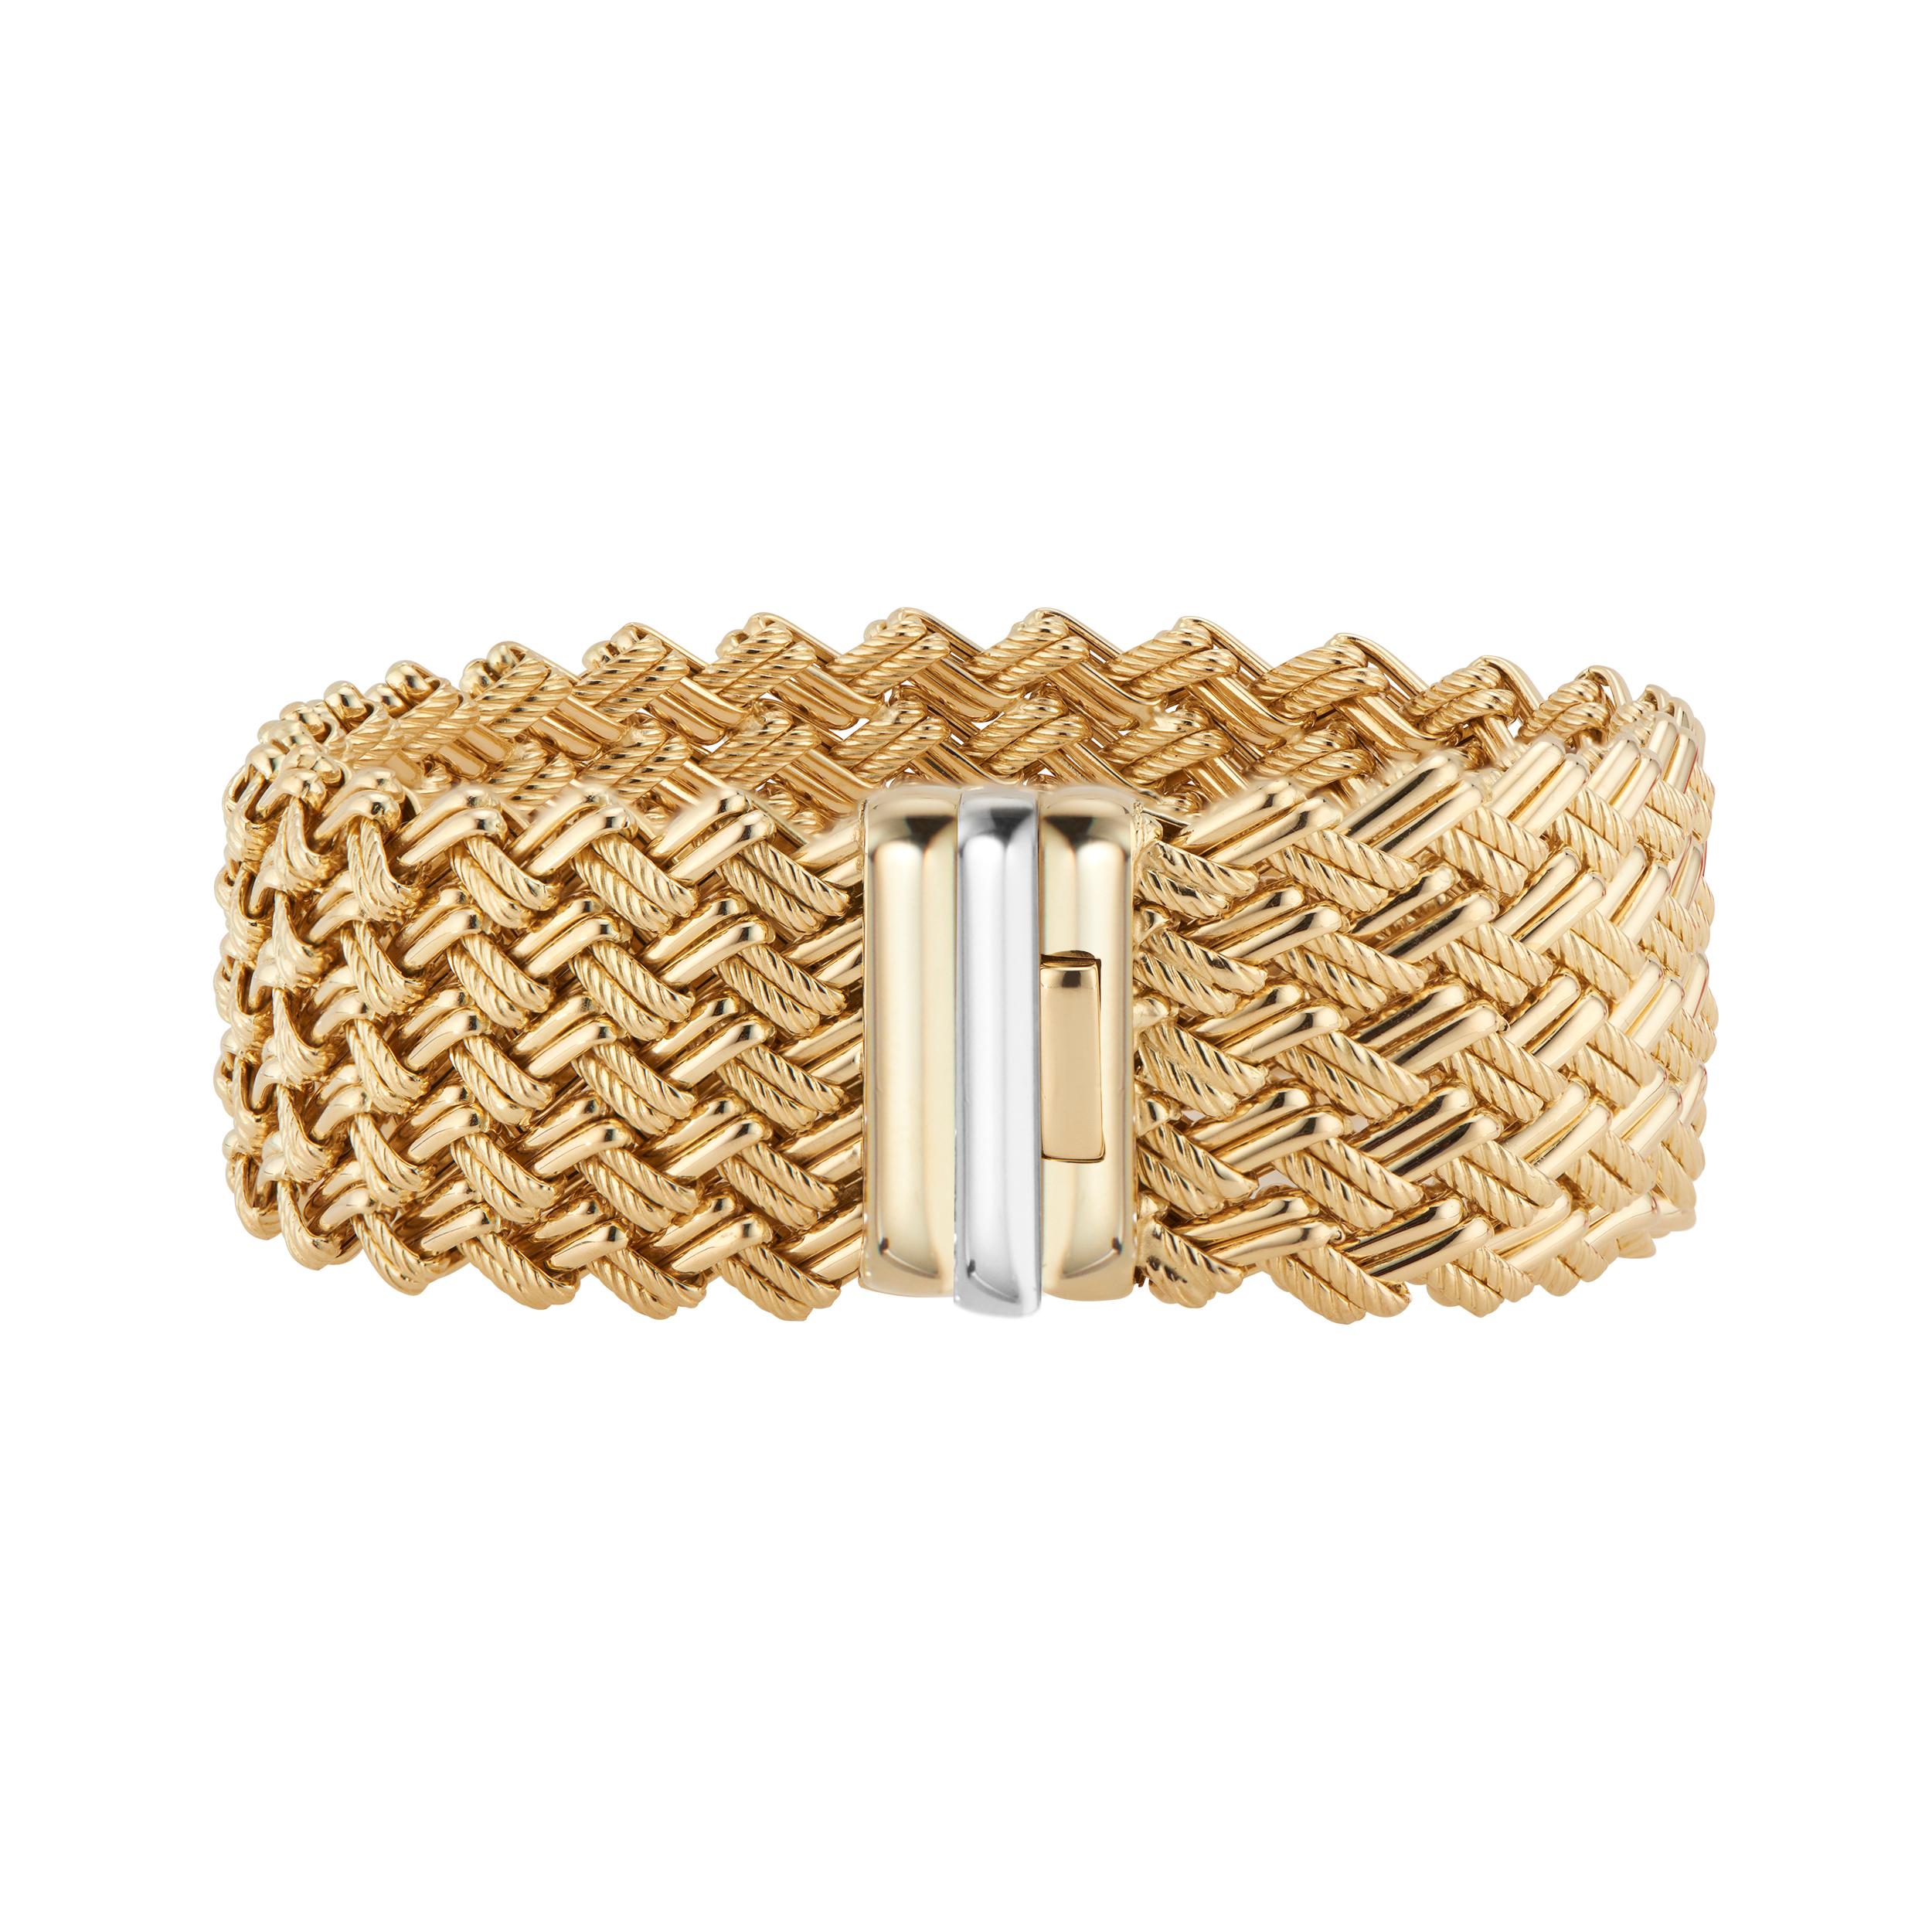 24.5mm wide 18k yellow gold wide woven Italian bracelet. 7.5 Inches

18k yellow gold 
Stamped: 18k
56.2 grams
Length: 7.5 Inches
Width: 24.5mm
Thickness/depth 4.2mm
